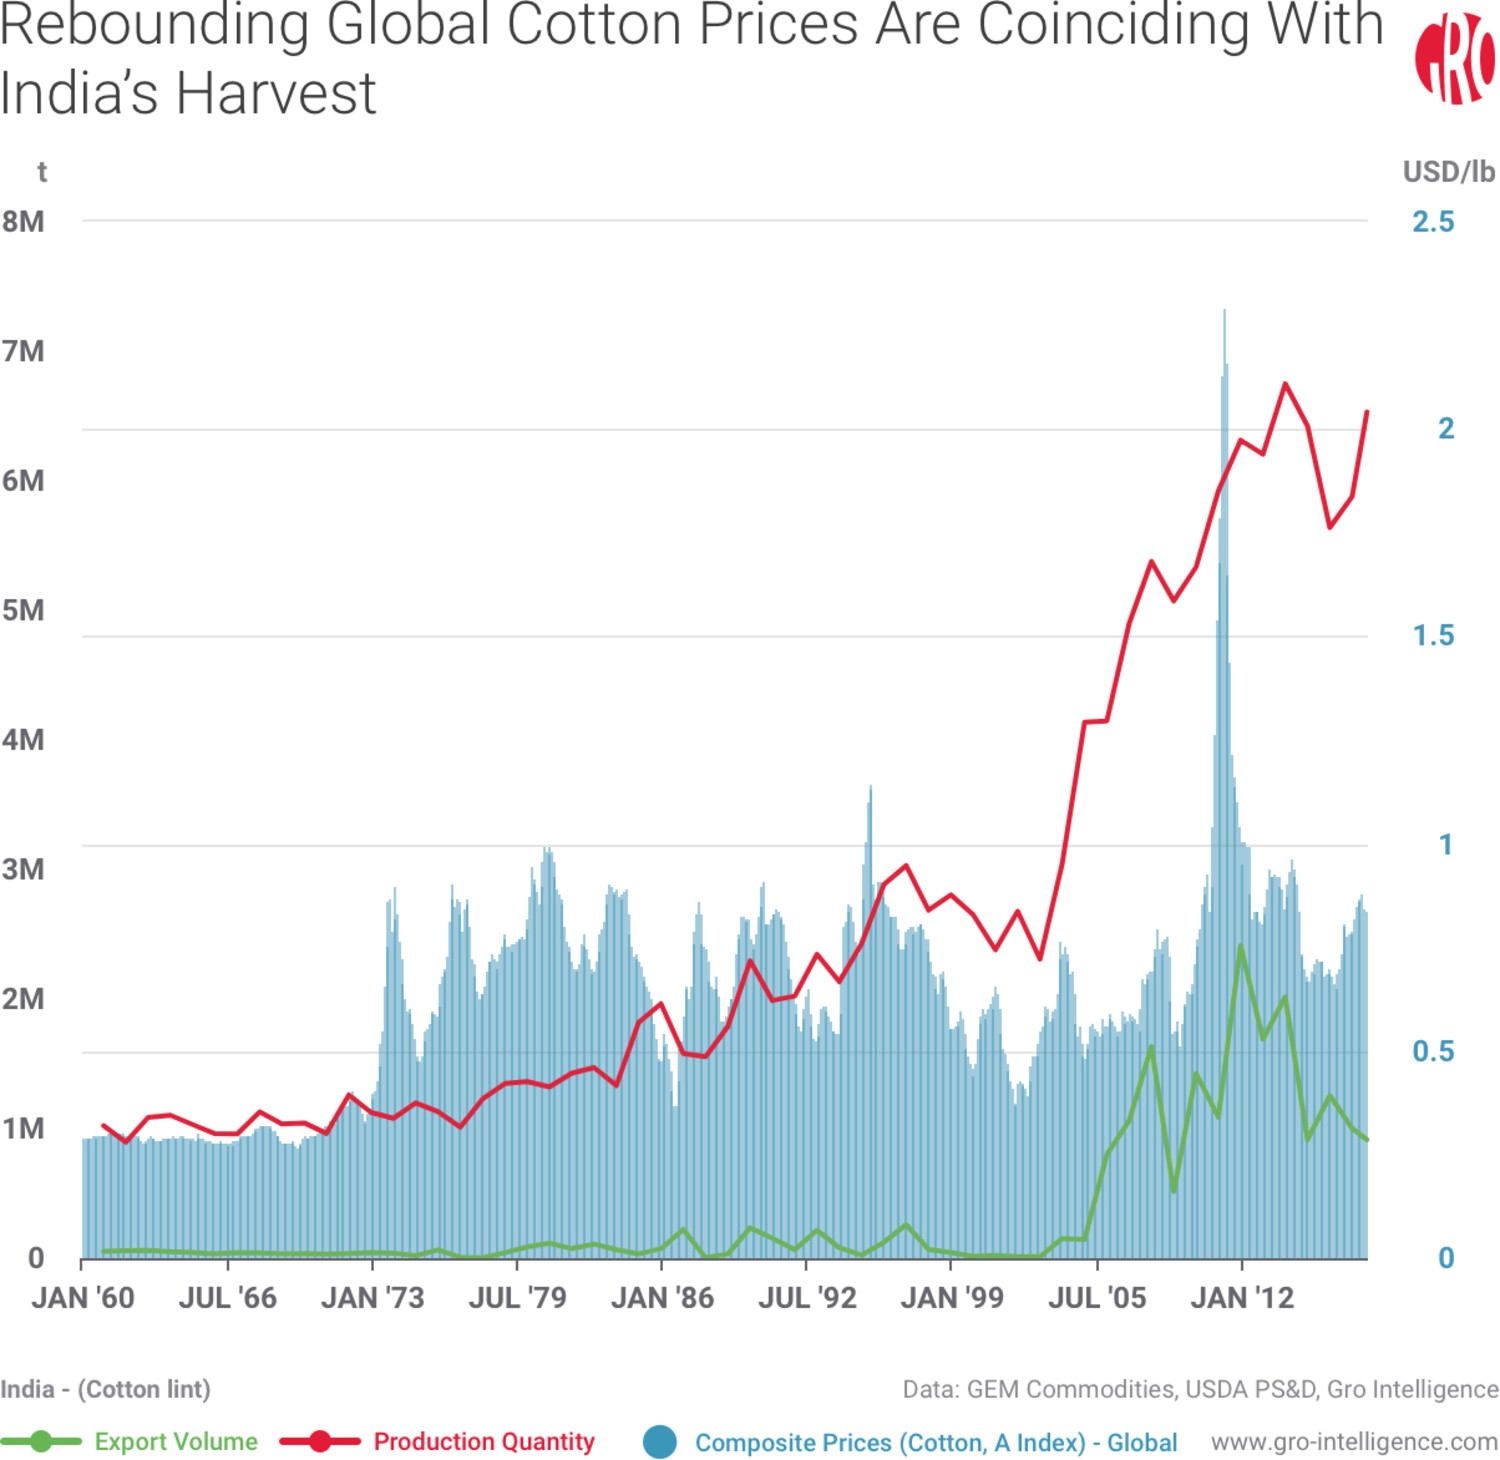 Rebounding Global Cotton Prices Are Coinciding with India’s Harvest